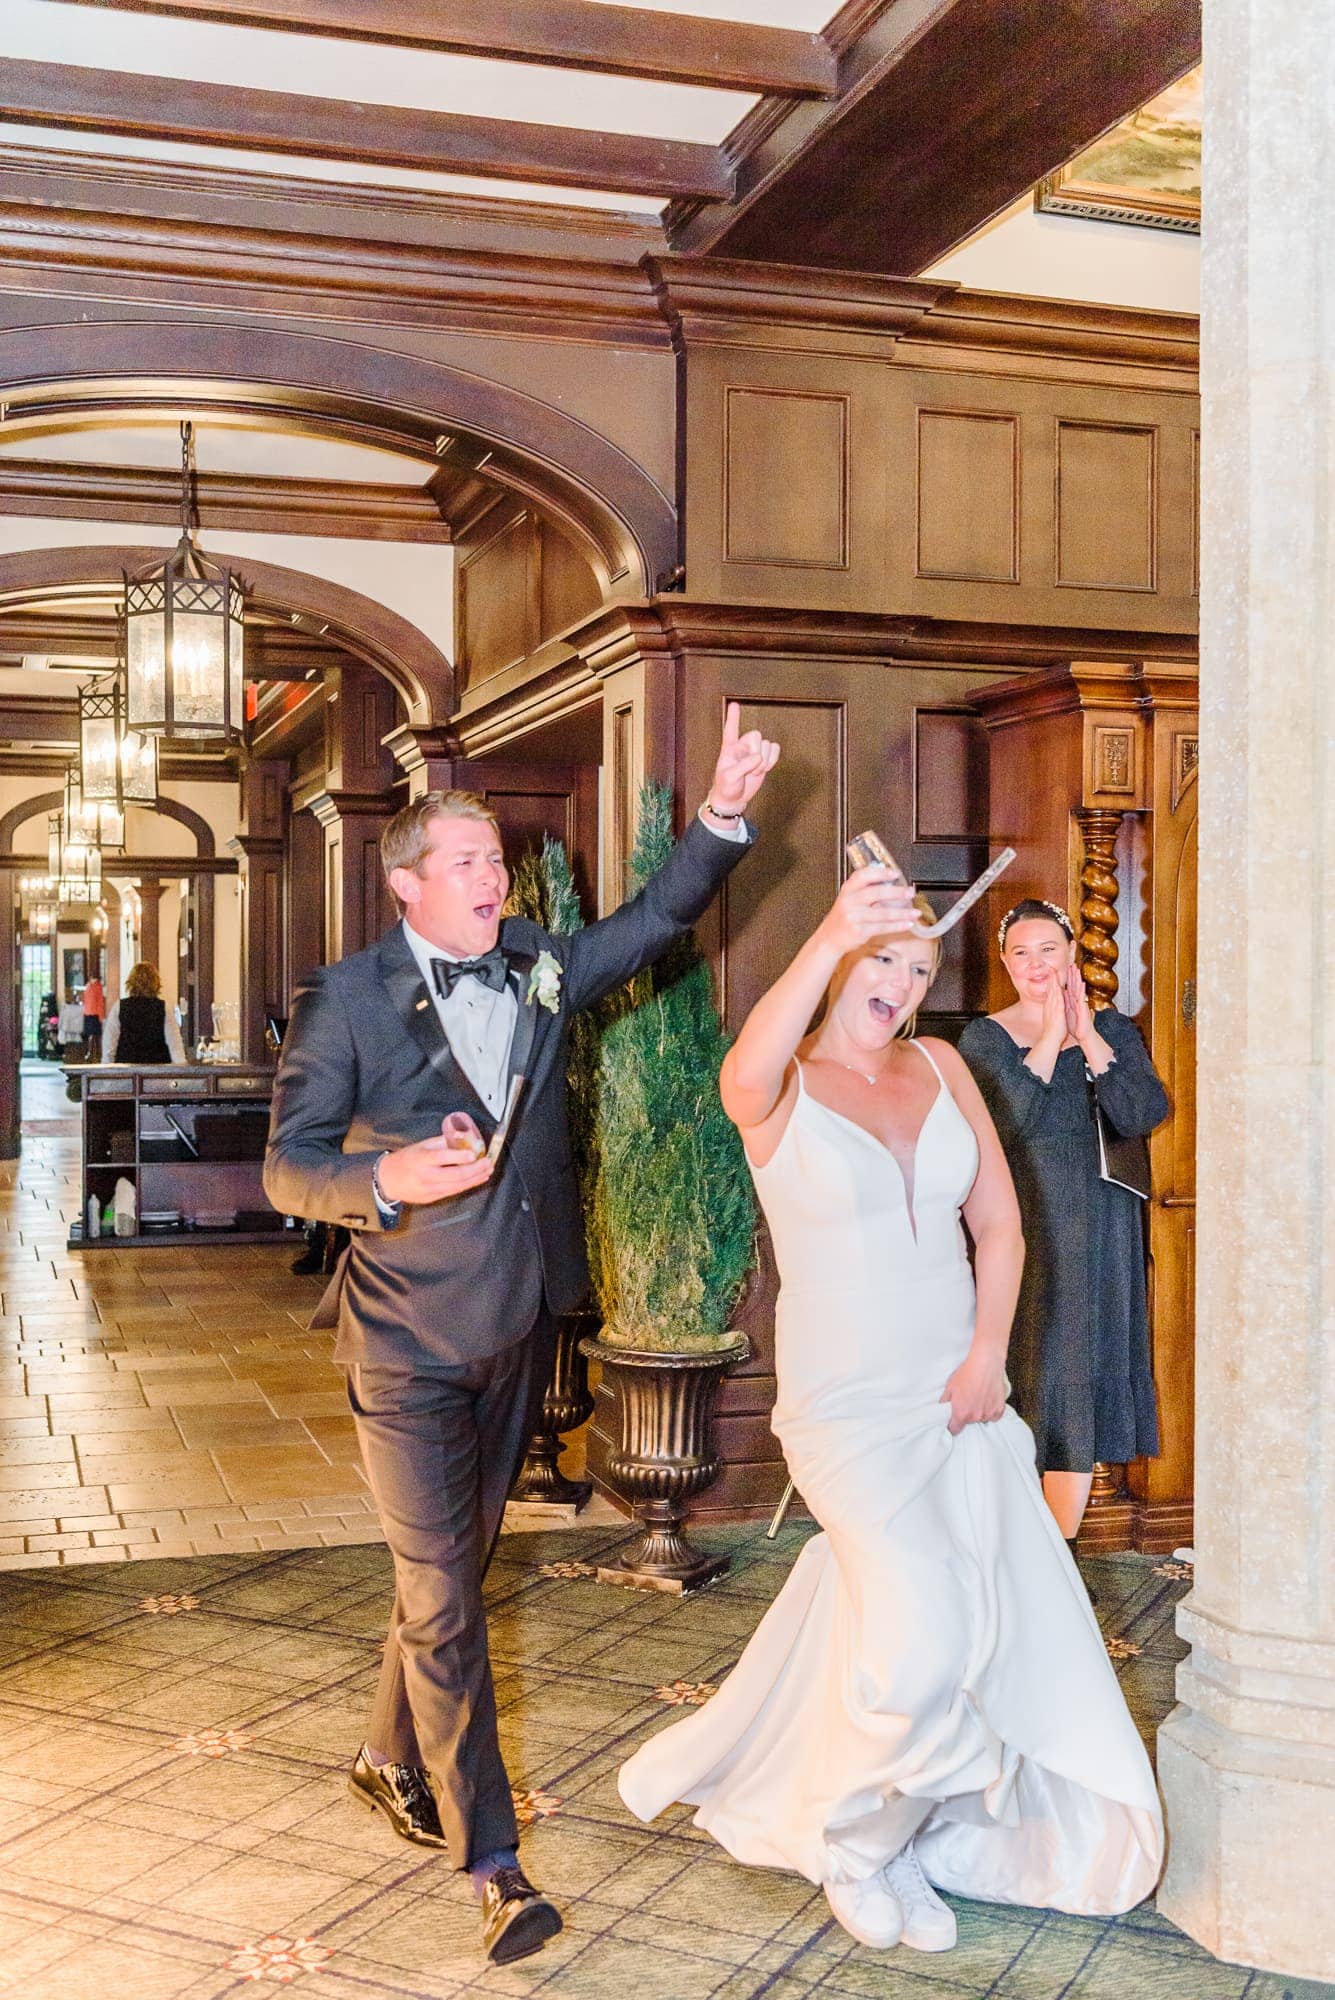 The bride and groom had a high energy entrance to their Charlotte reception at the Longview Country Club.